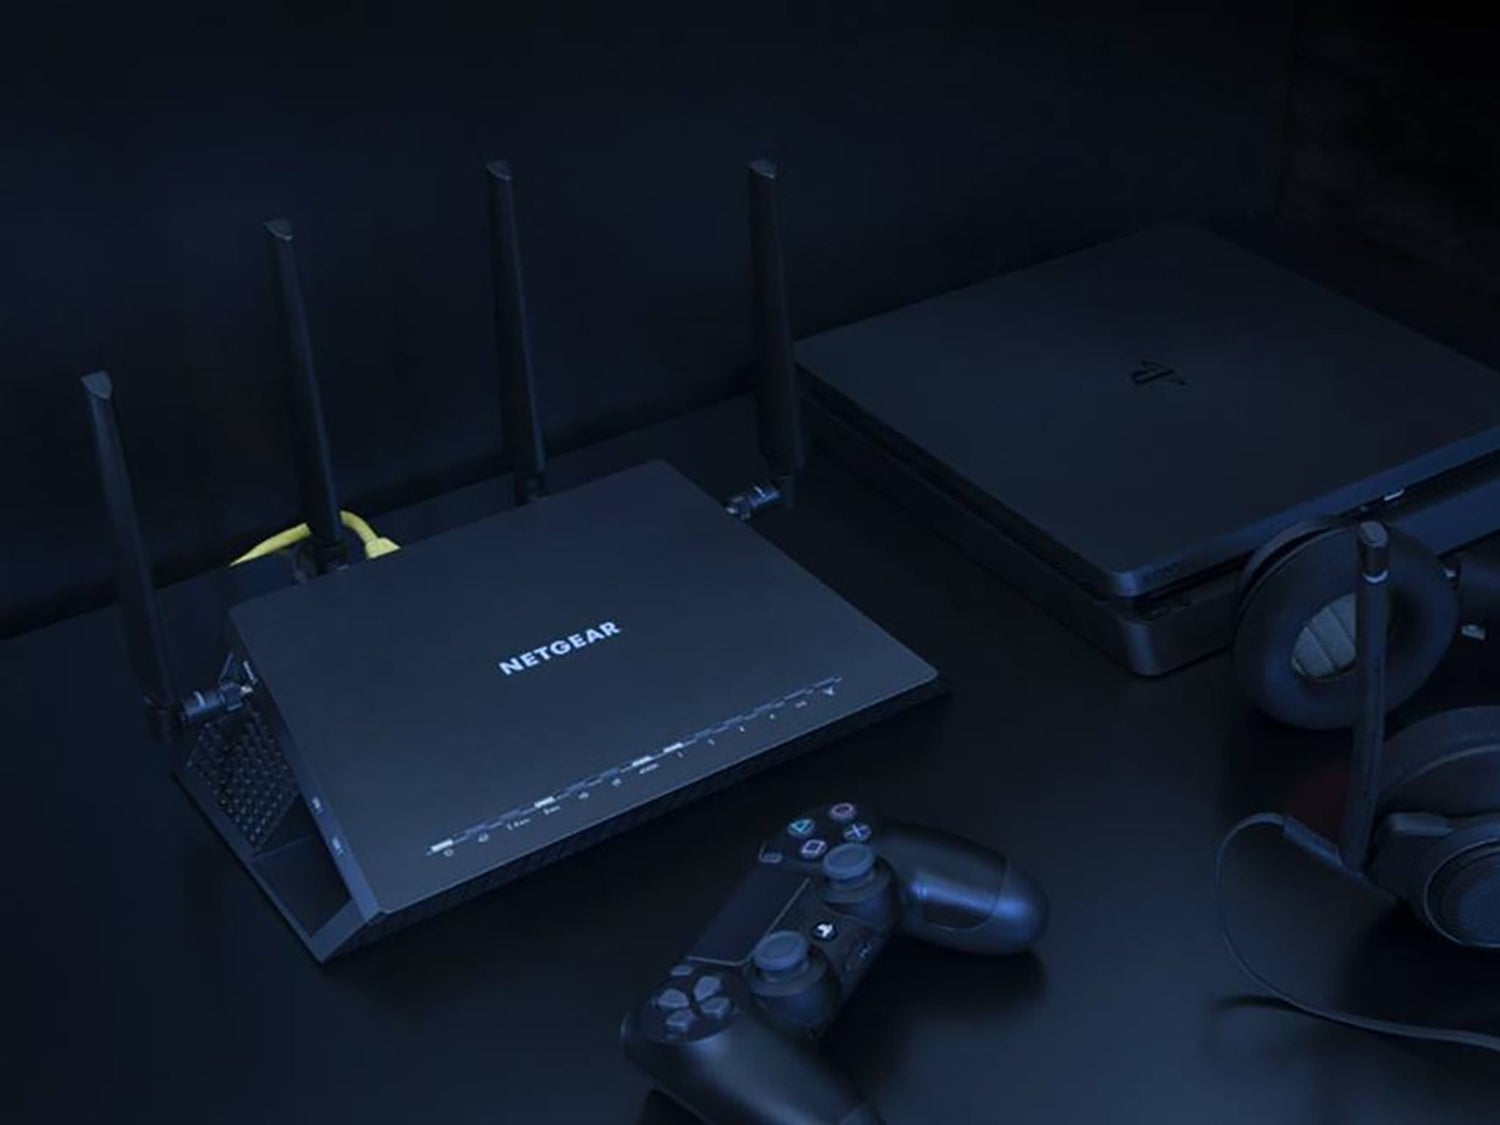 A Netgear router near a PlayStation video game console and headphones.